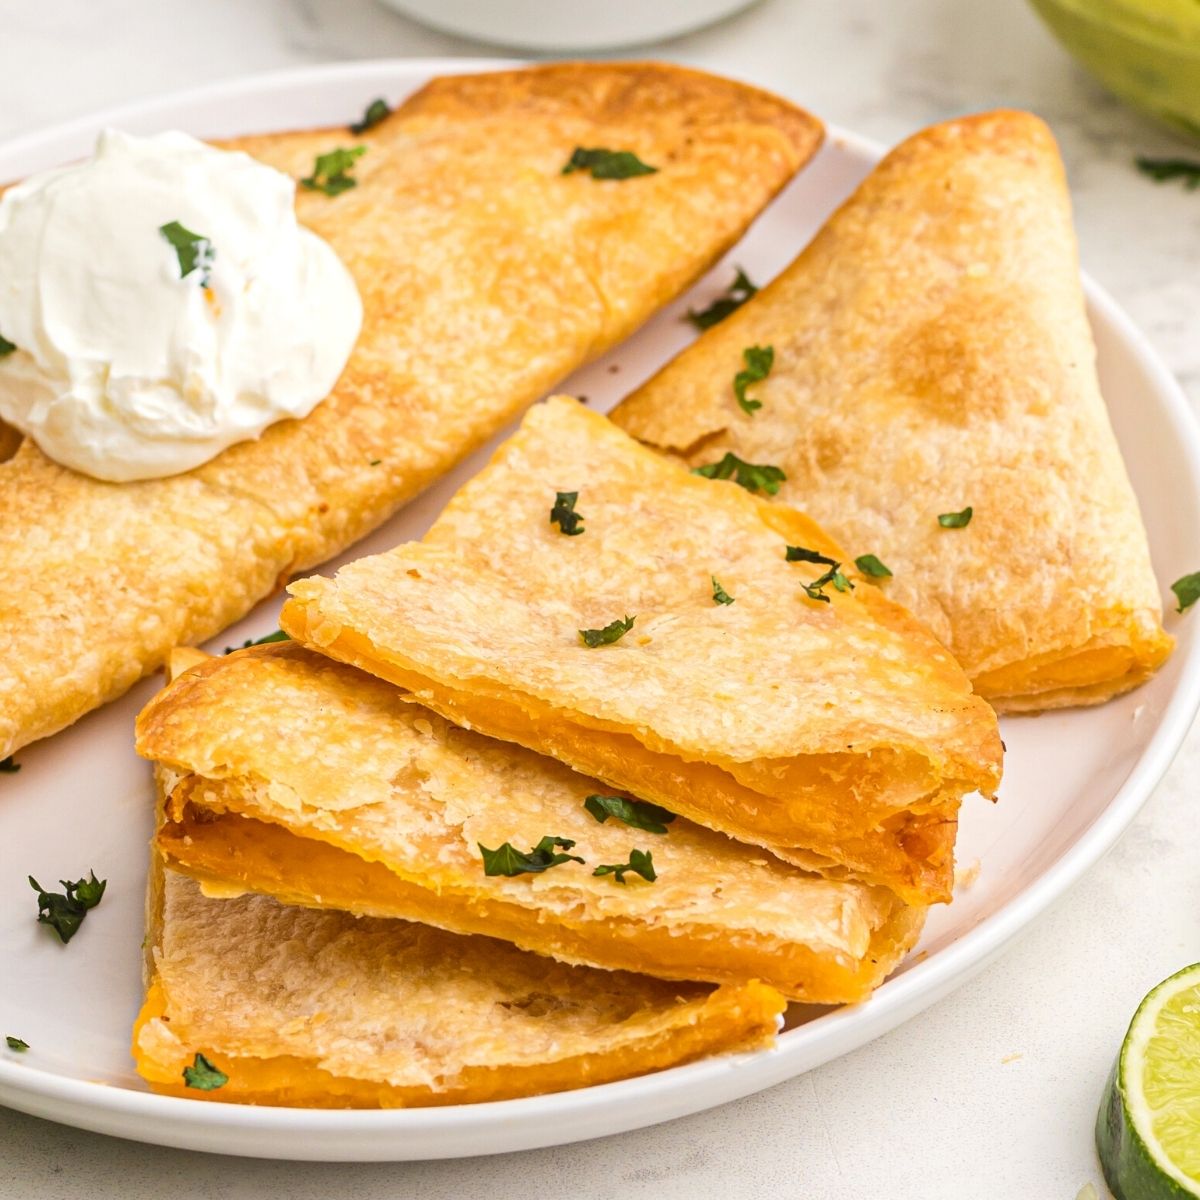 Golden crispy tortillas filled with cheese to make quesadillas